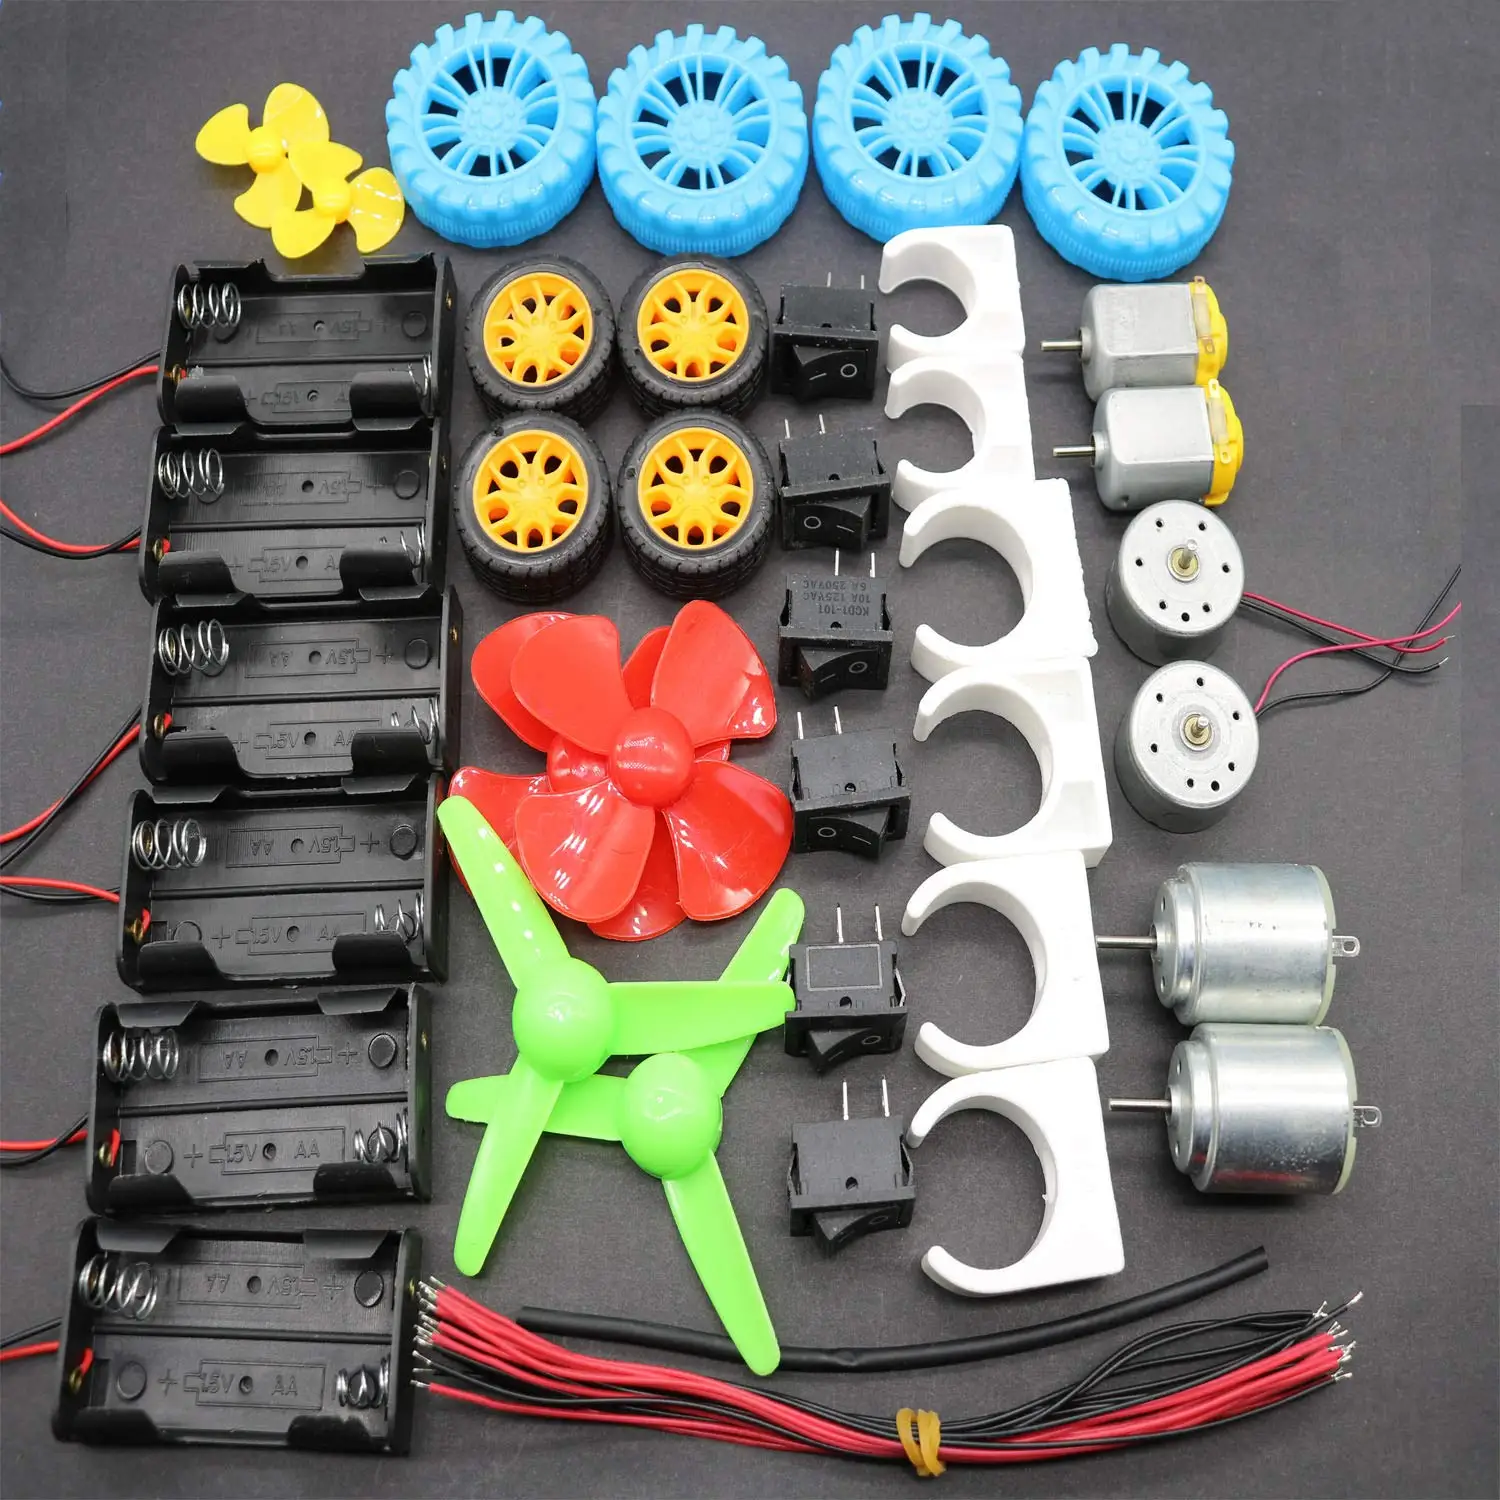 Unbekannt 78pcs Mini Electric DC Motor with Plastic Gears,Electronic Wire,Shaft Propeller for DIY Science Projects AOD